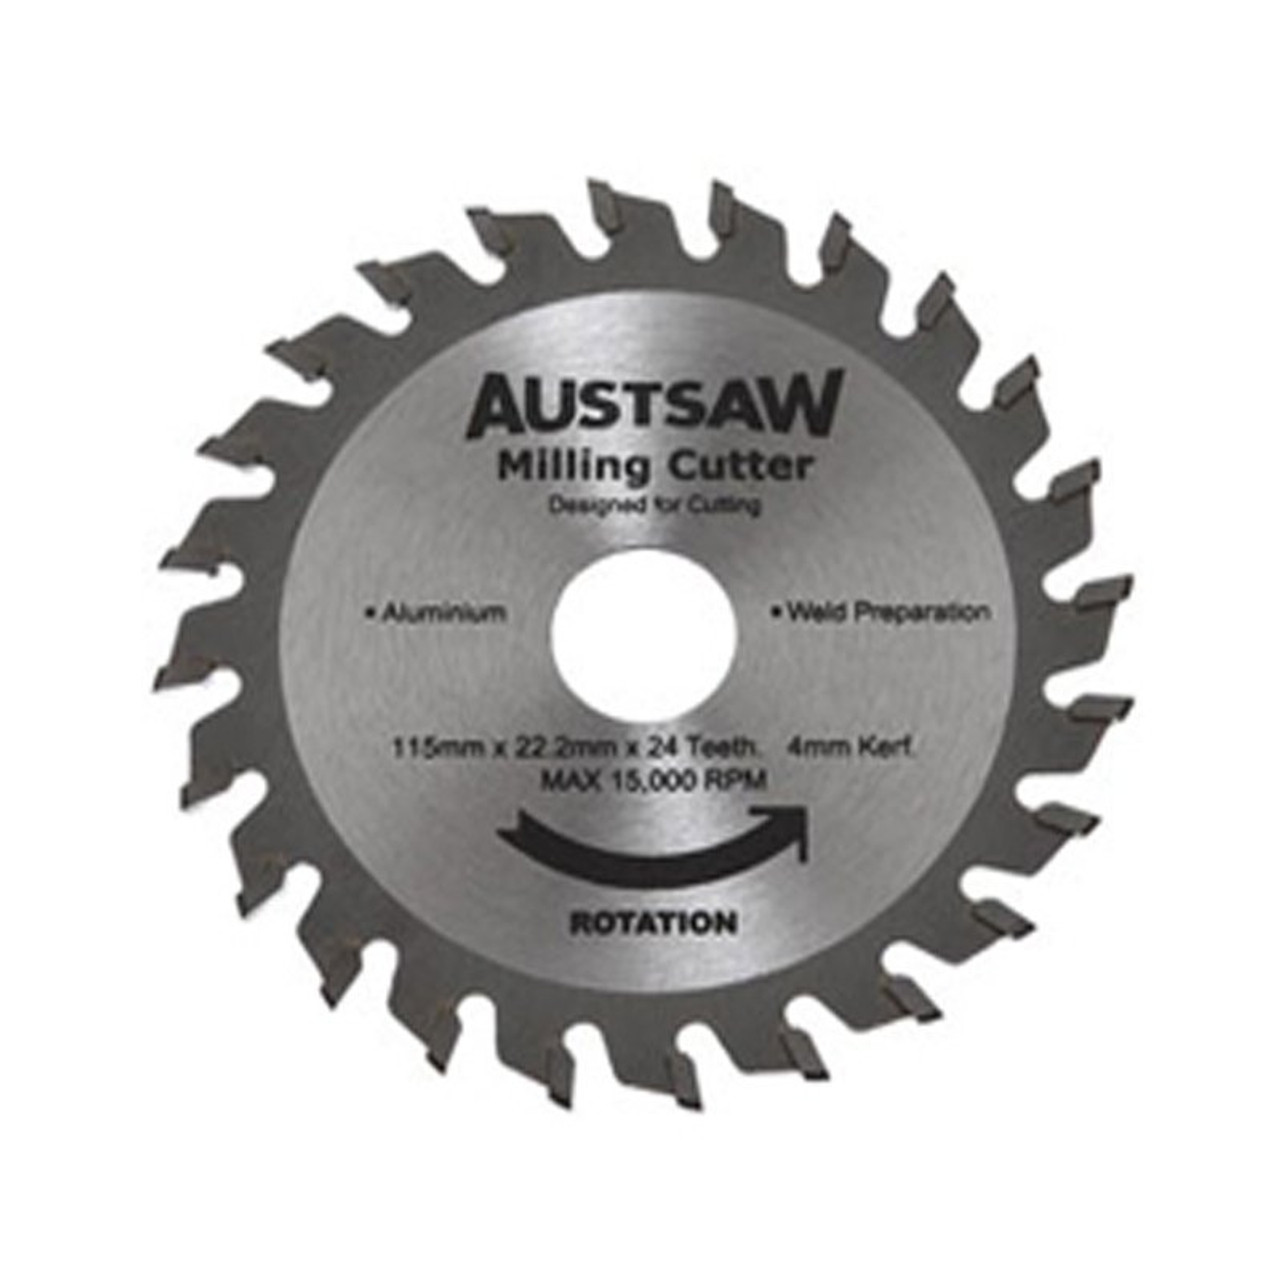 Austsaw - 115Mm (4.5In) 4Mm Milling Cutter Blade - 22.2Mm Bore - 24 Teeth